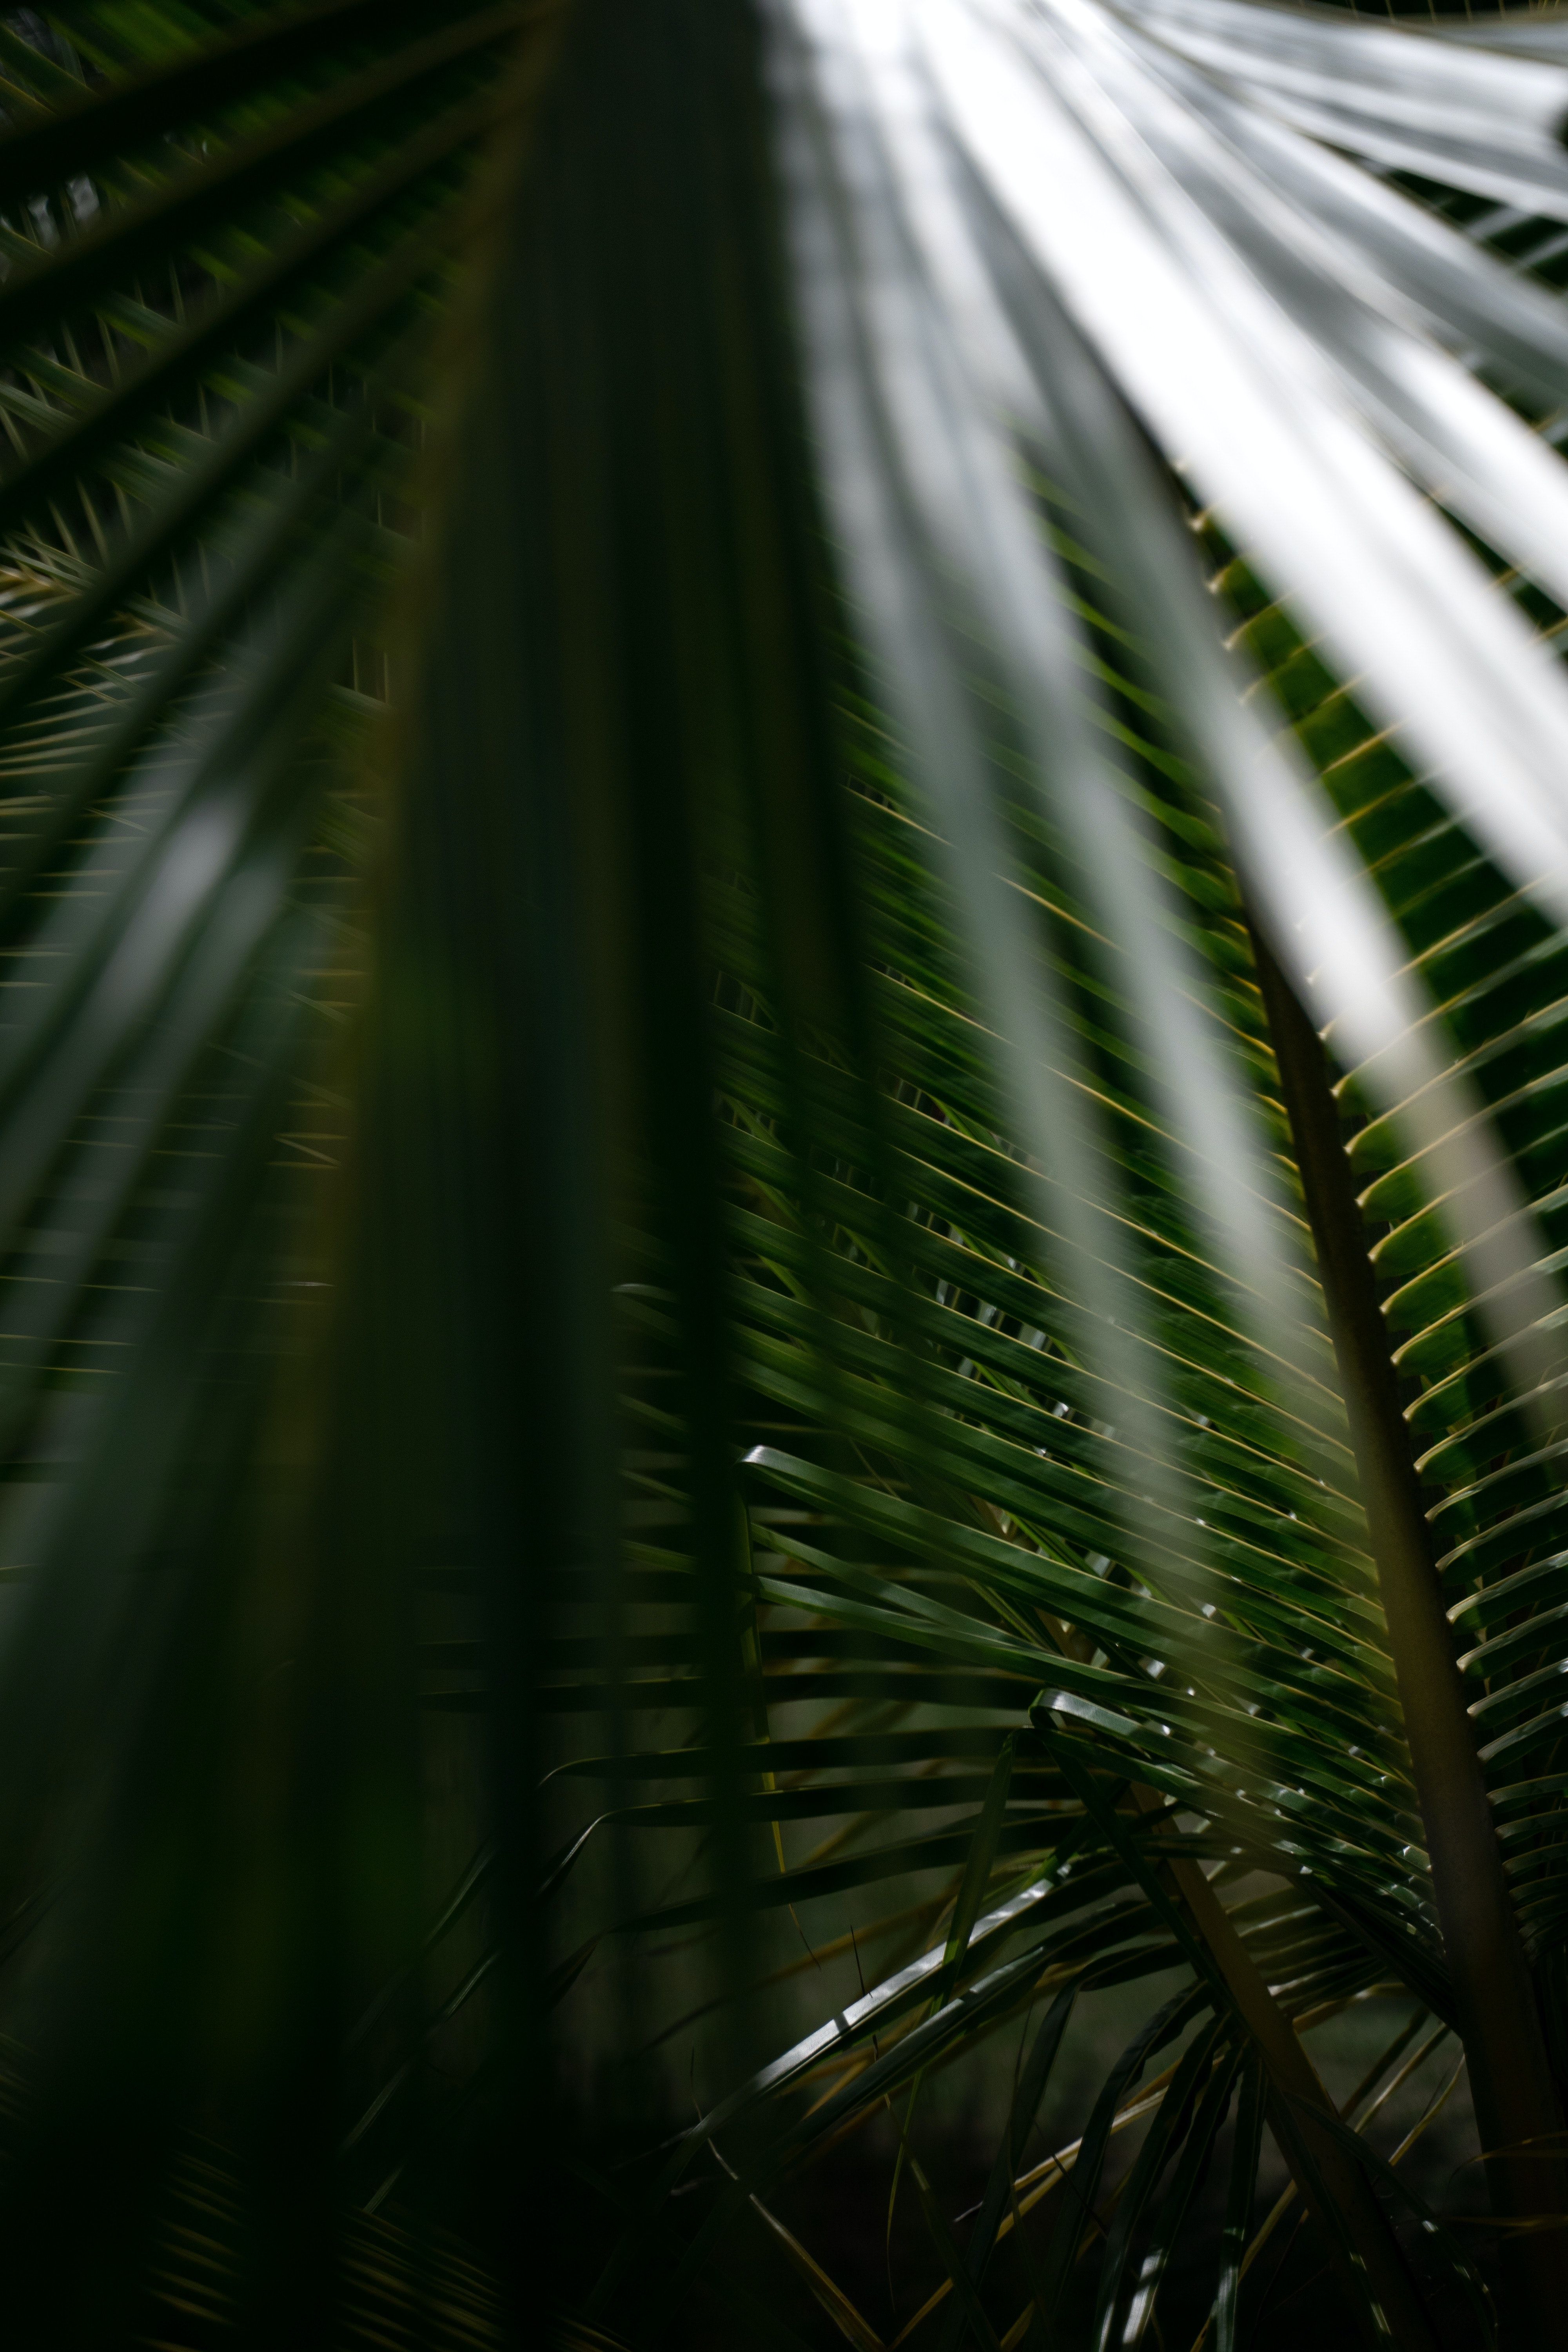 A close up of some palm leaves - Tropical